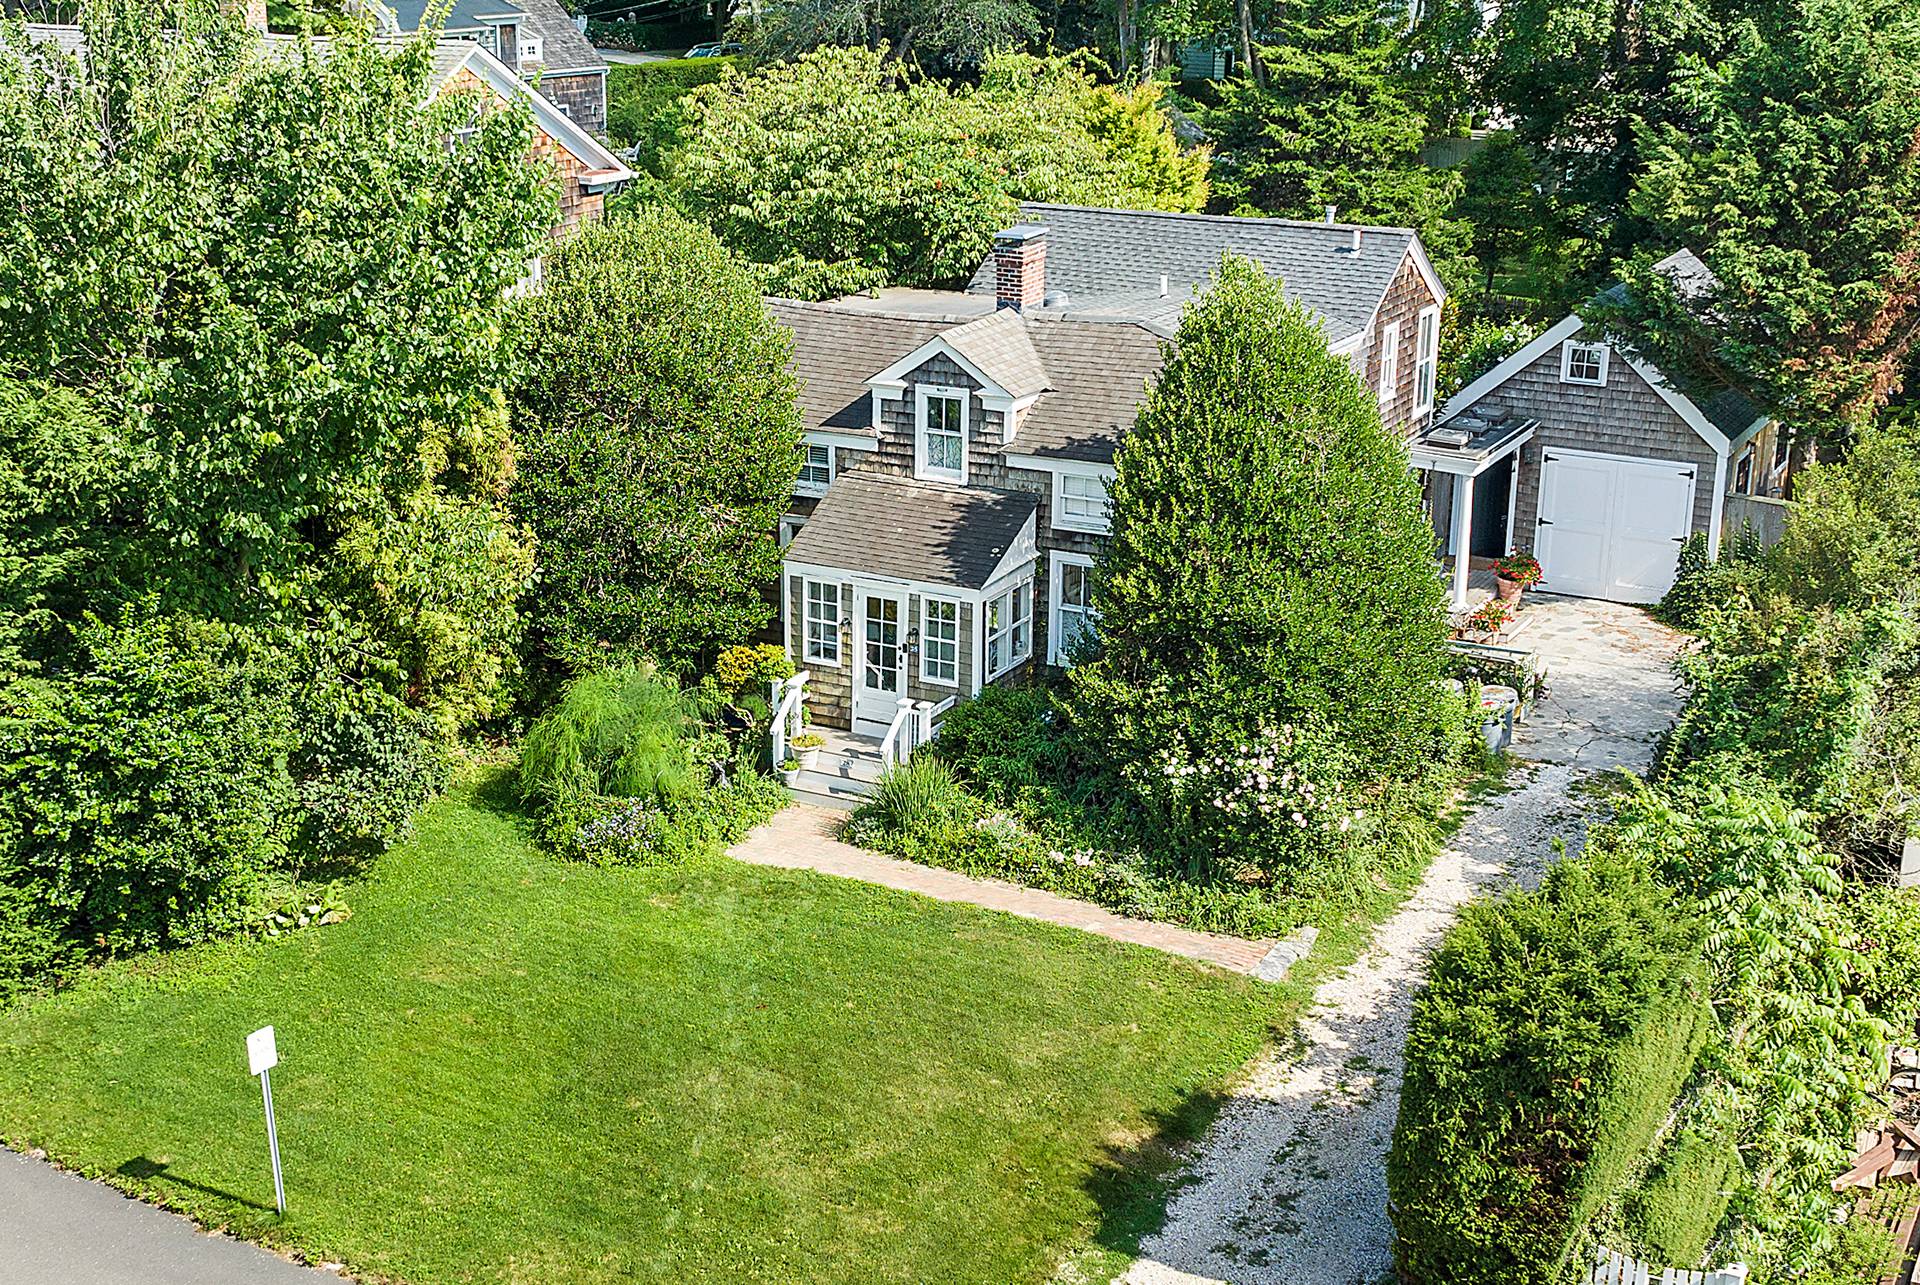 Property for Sale at 28 Bowden Square, Village Of Southampton, Hamptons, NY - Bedrooms: 3 
Bathrooms: 2.5  - $2,250,000